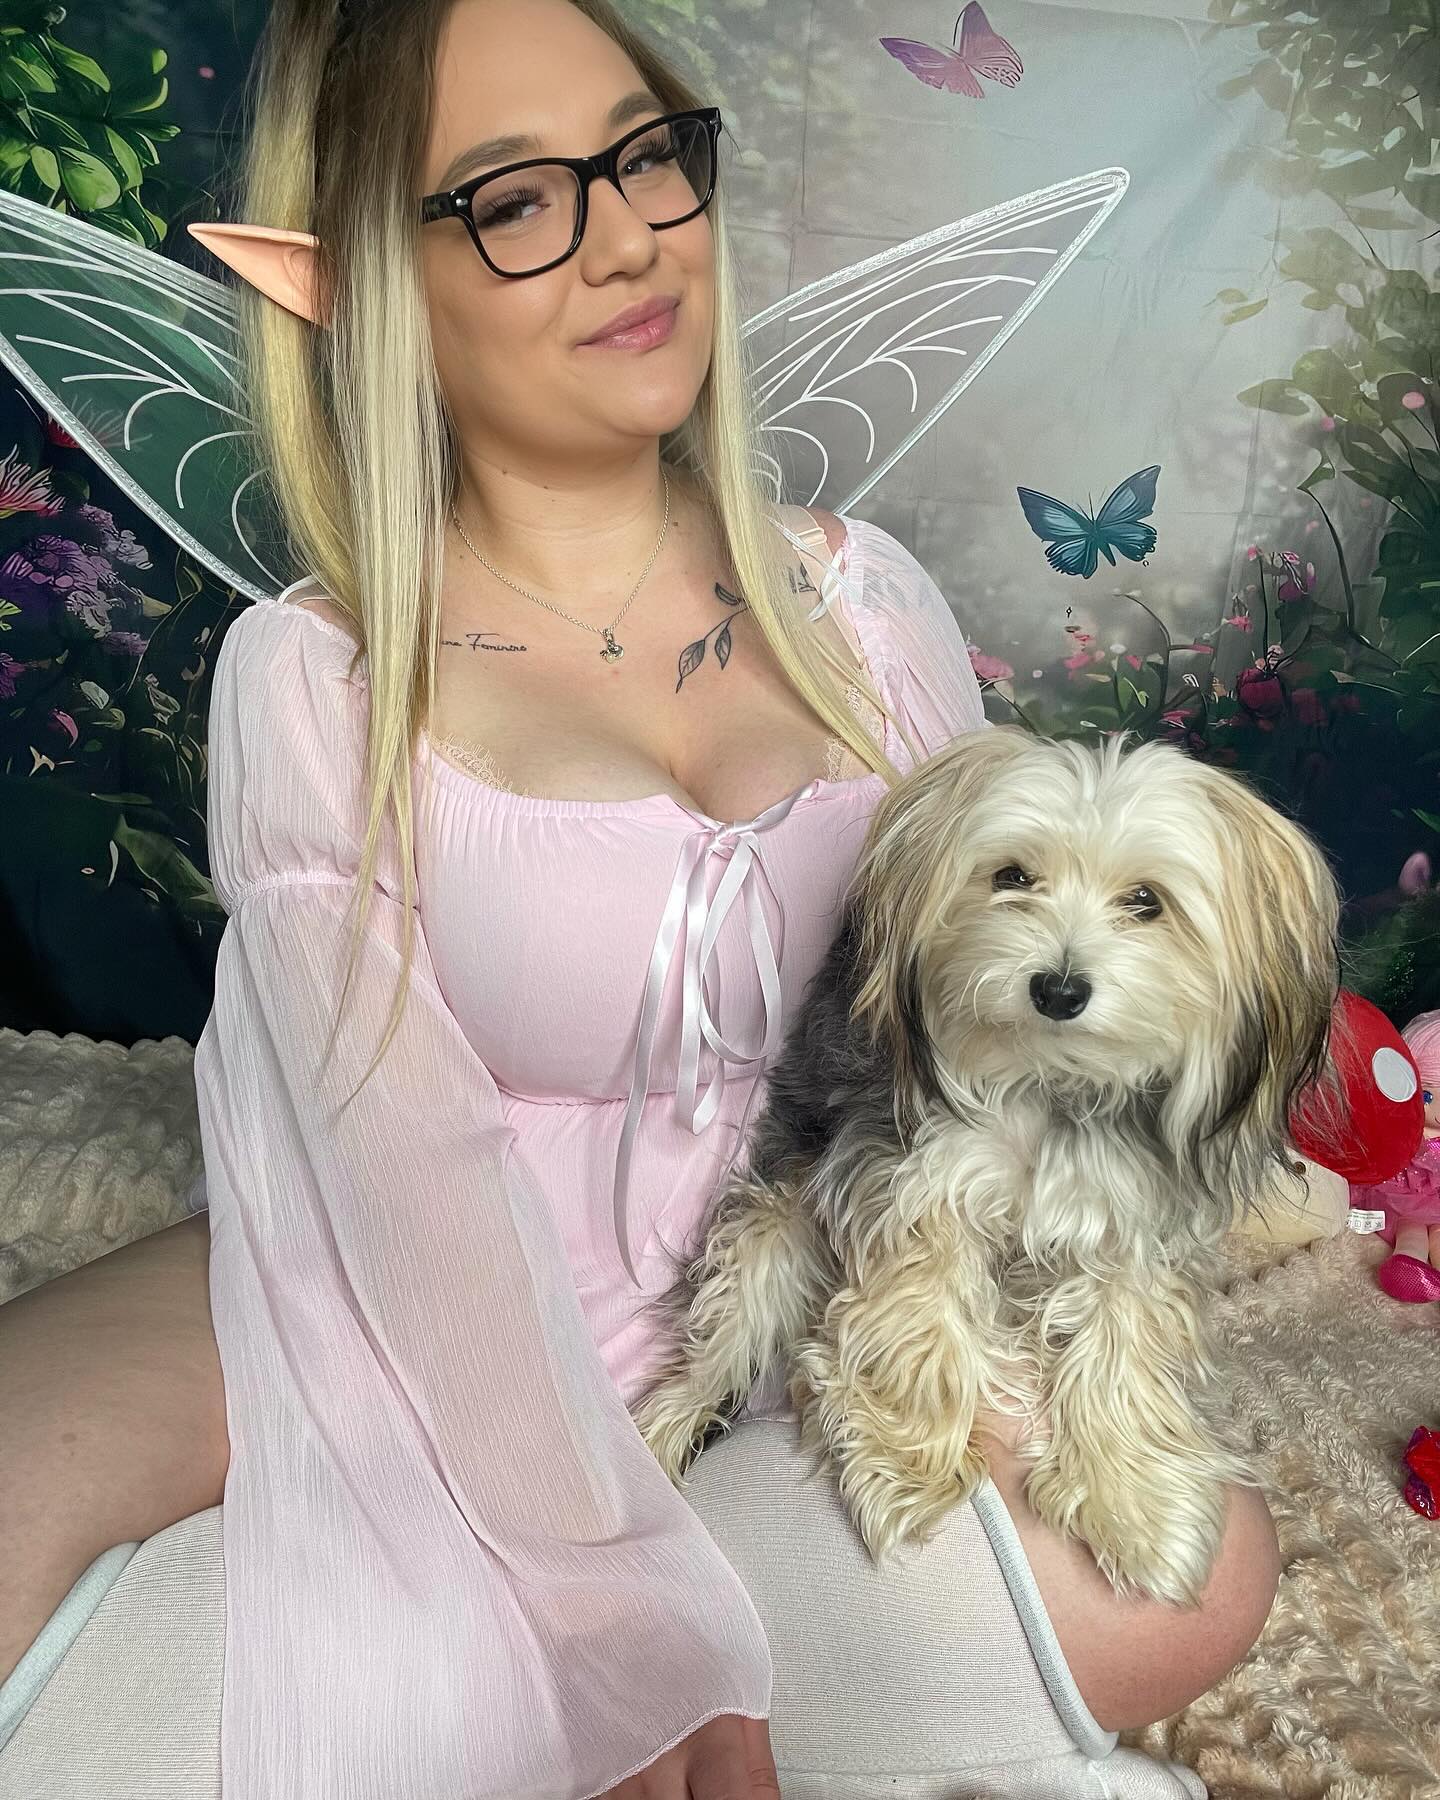 Just a Fairy & her furry friend 🐾🧚‍♀️✨ #fyp #explore #foryoupage #explorepage